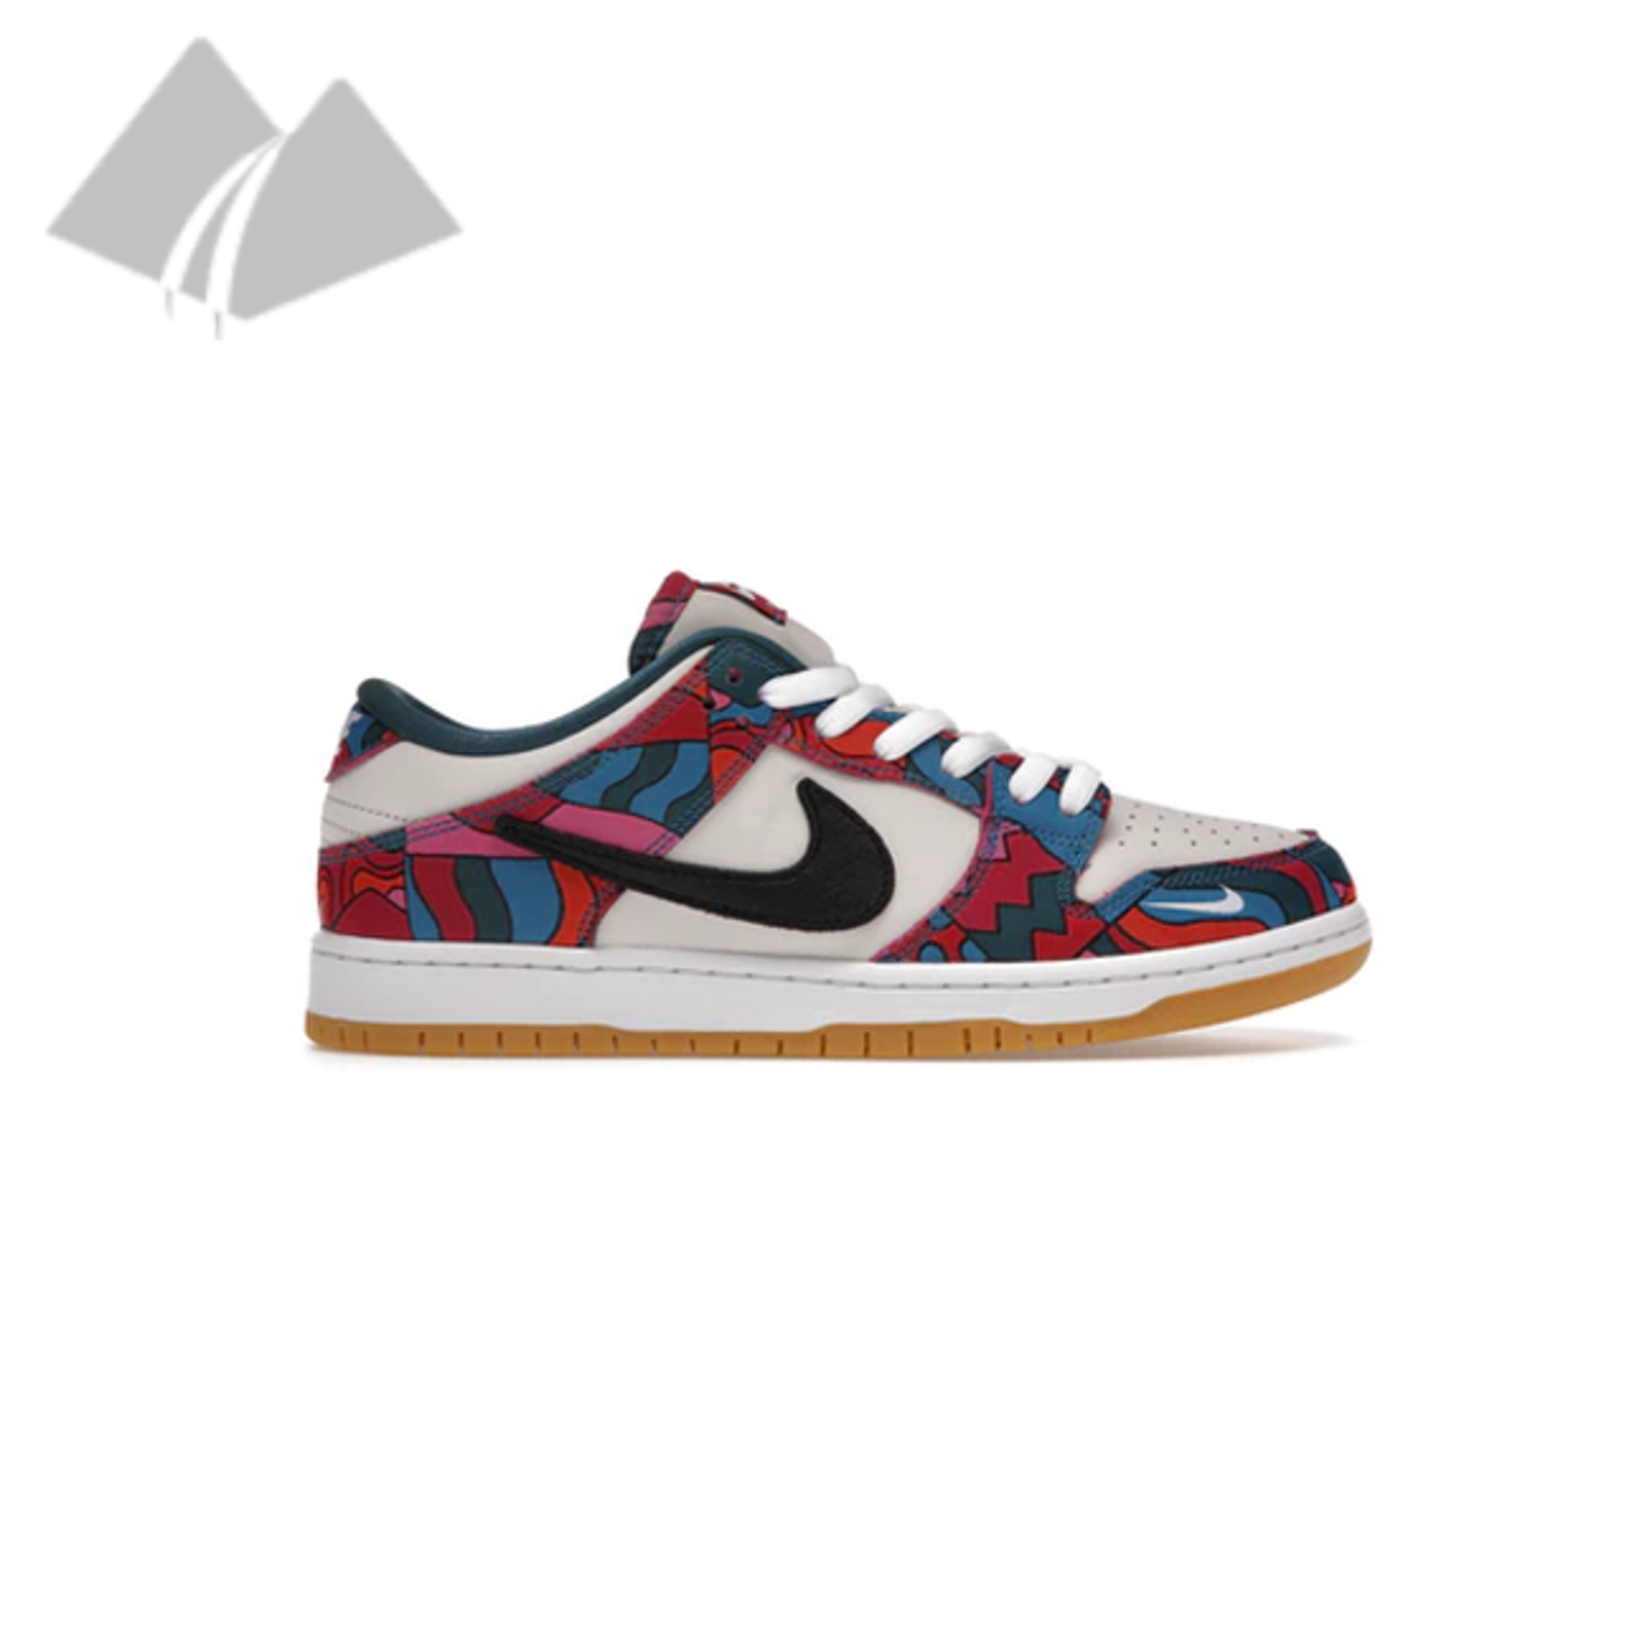 Nike Nike SB Dunk Low (M) Parra Abstract Art (2021)